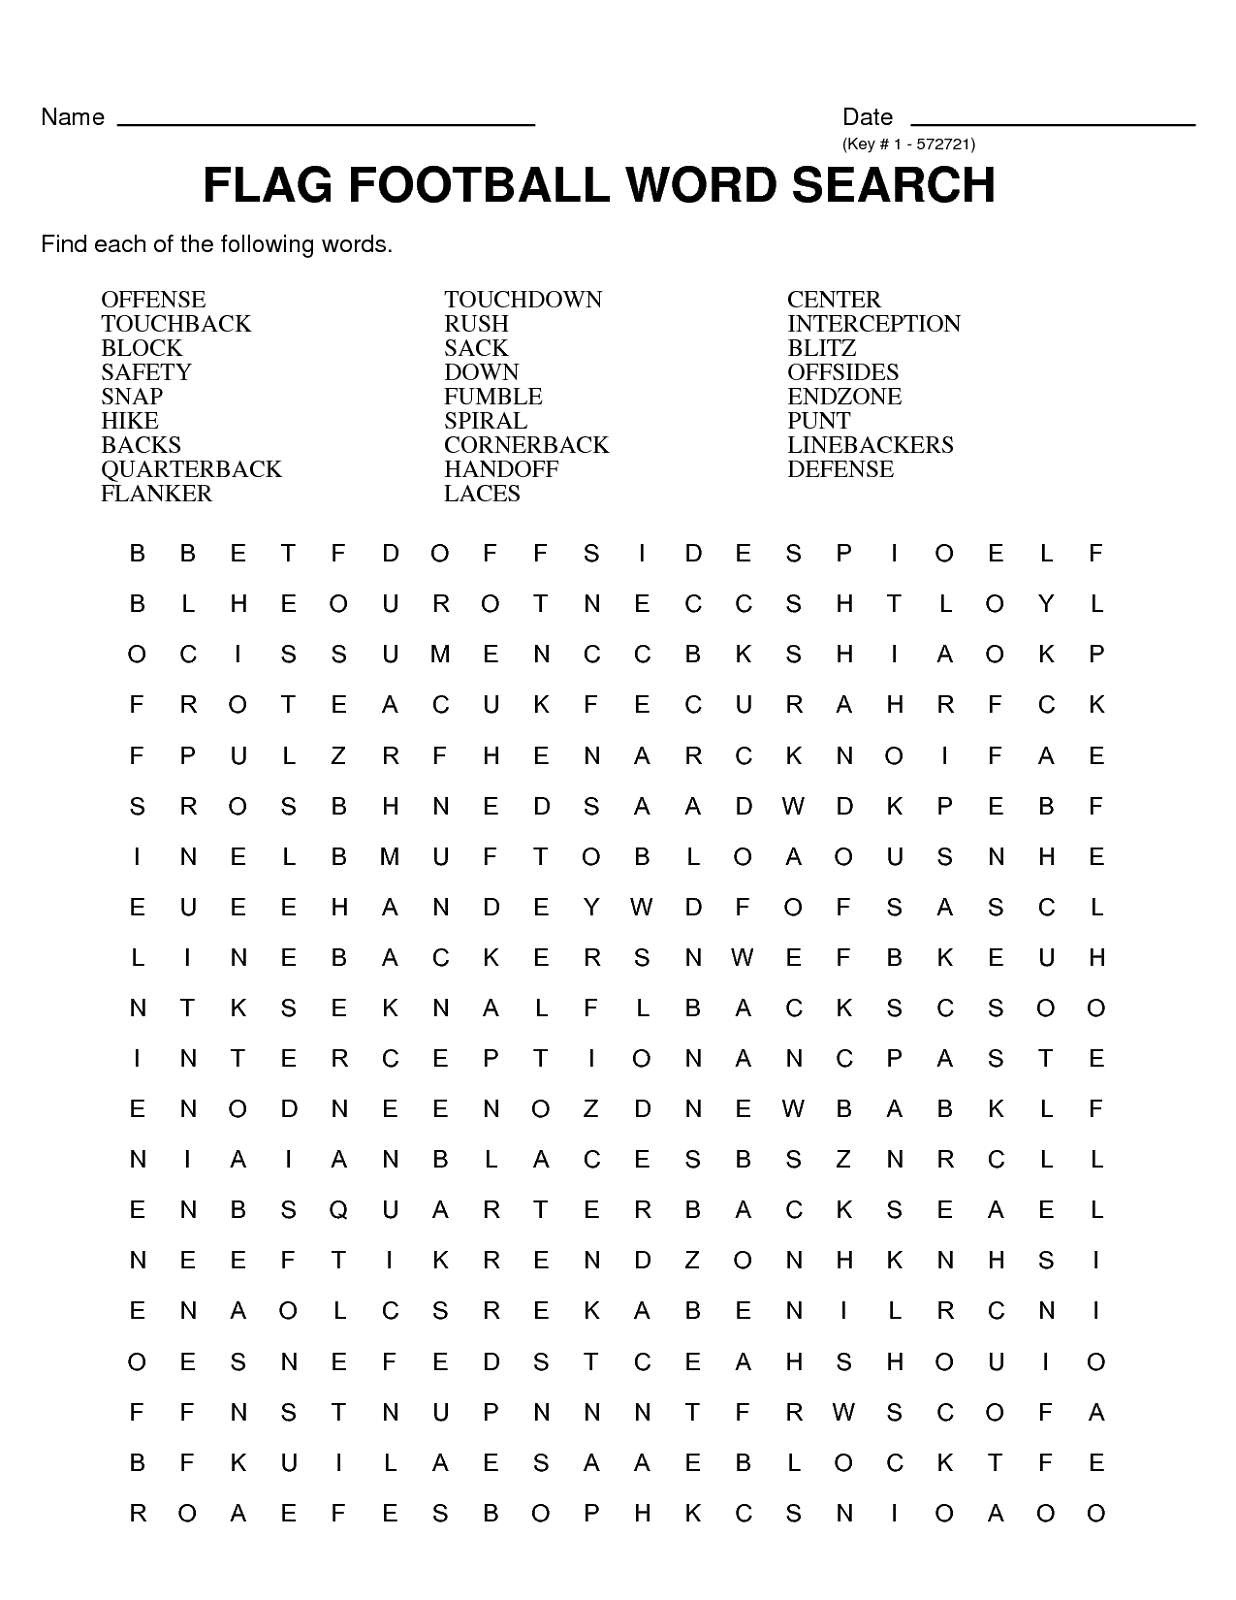 soccer-word-search-flag